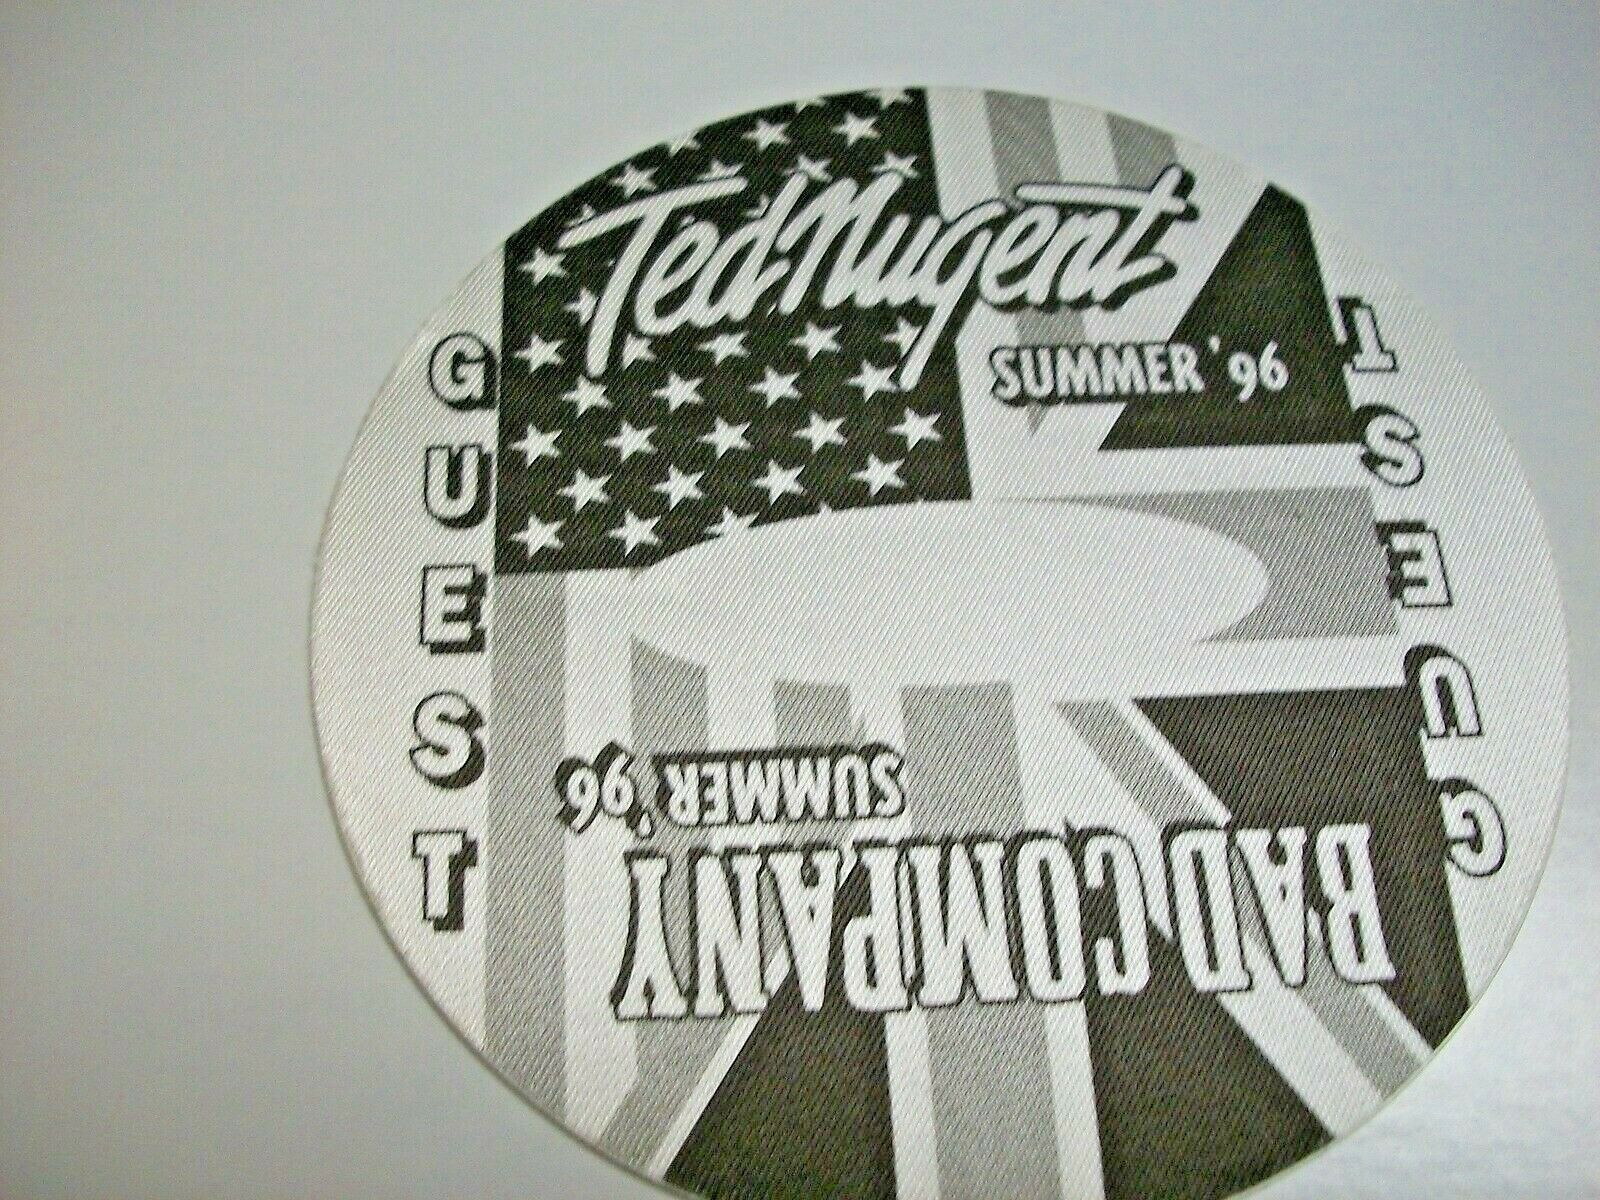 Ted Nugent Bad Company 1996 backstage pass